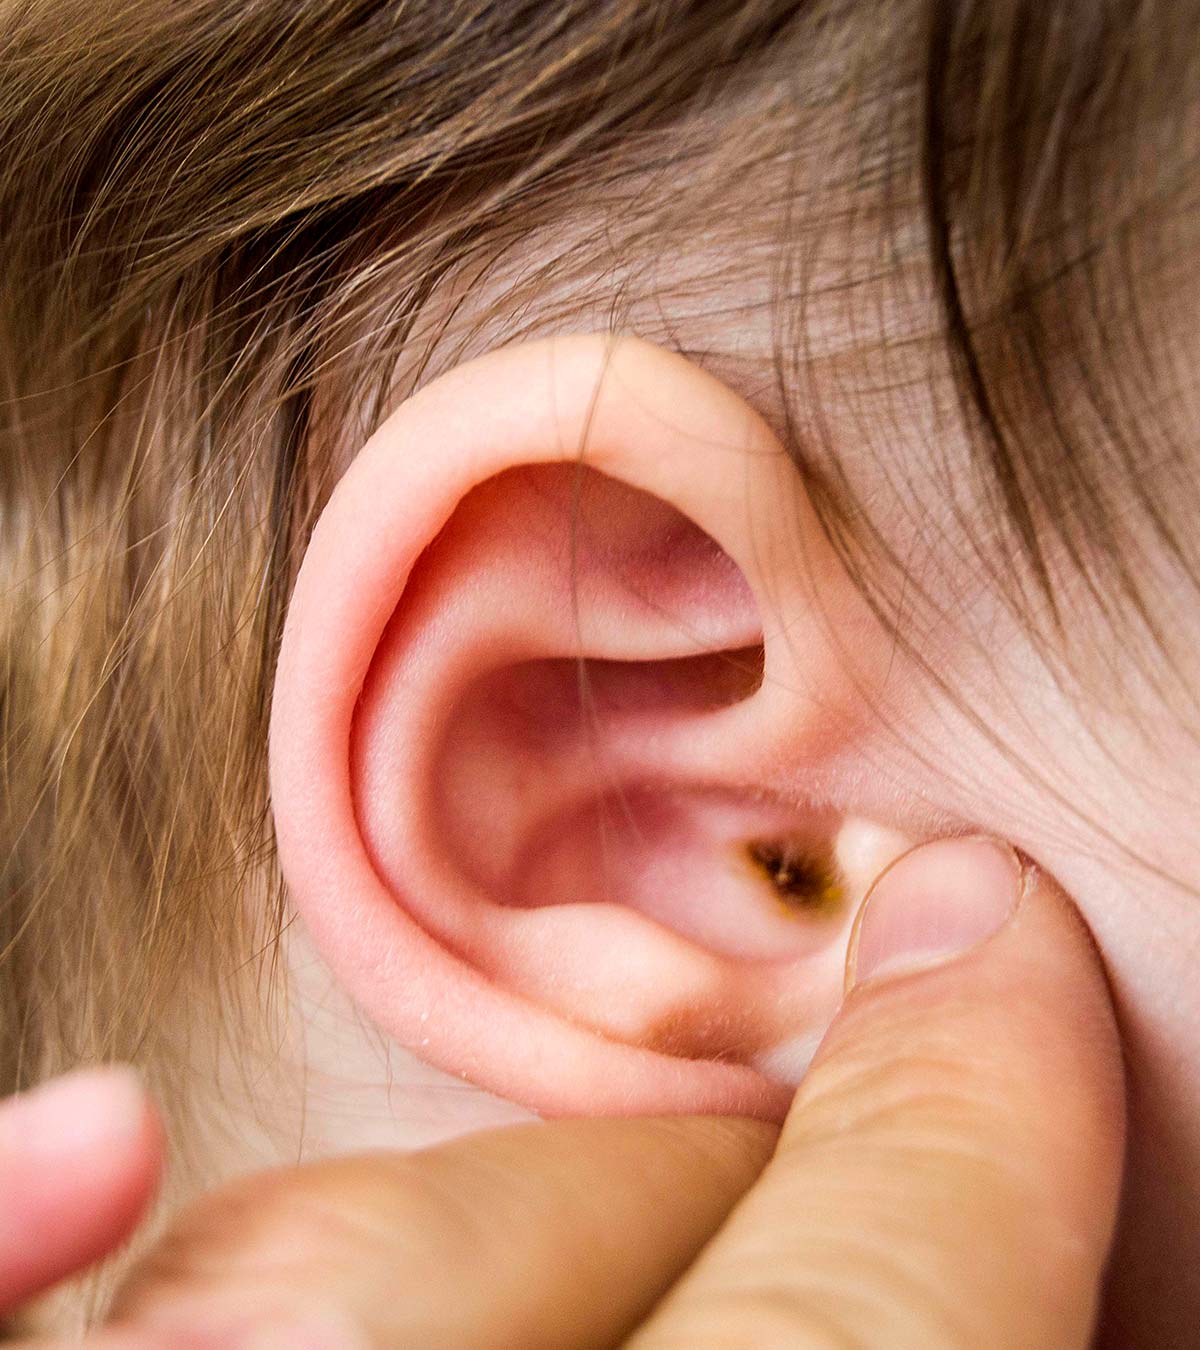 How To Clean Baby Earwax? Effective Tips And Home Remedies